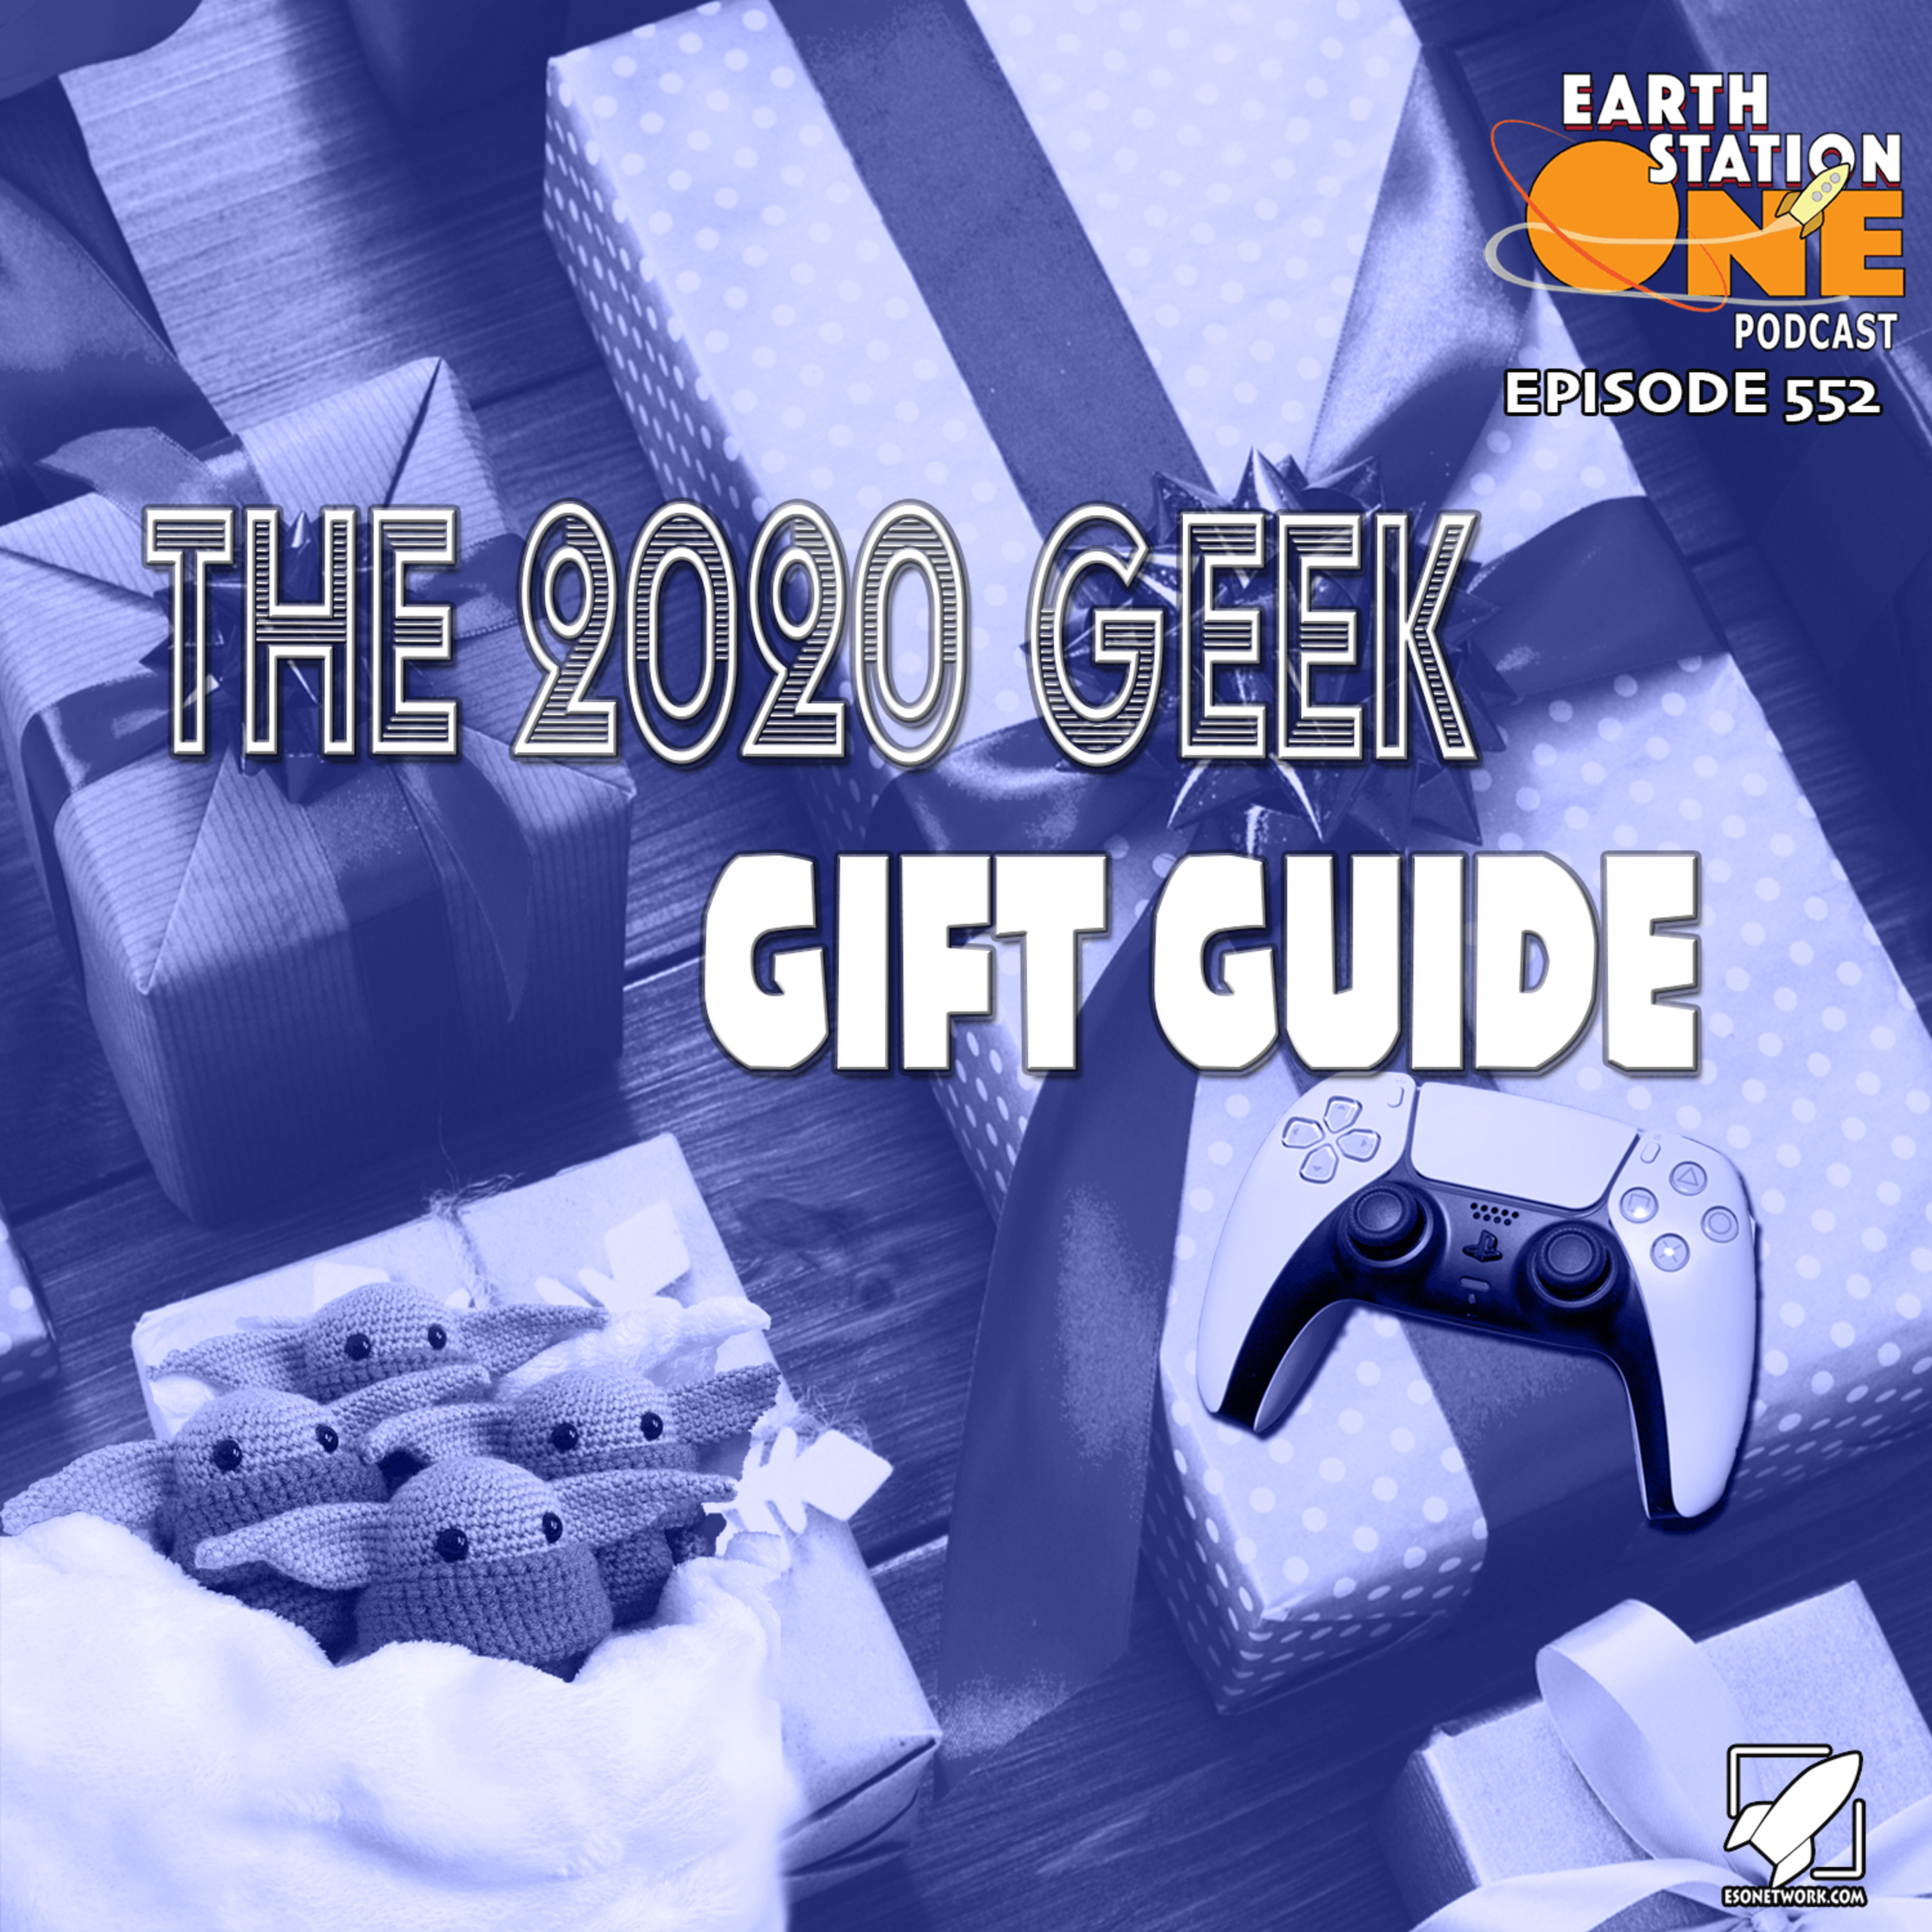 The Earth Station One Podcast – The 2020 Geek Gift Guide